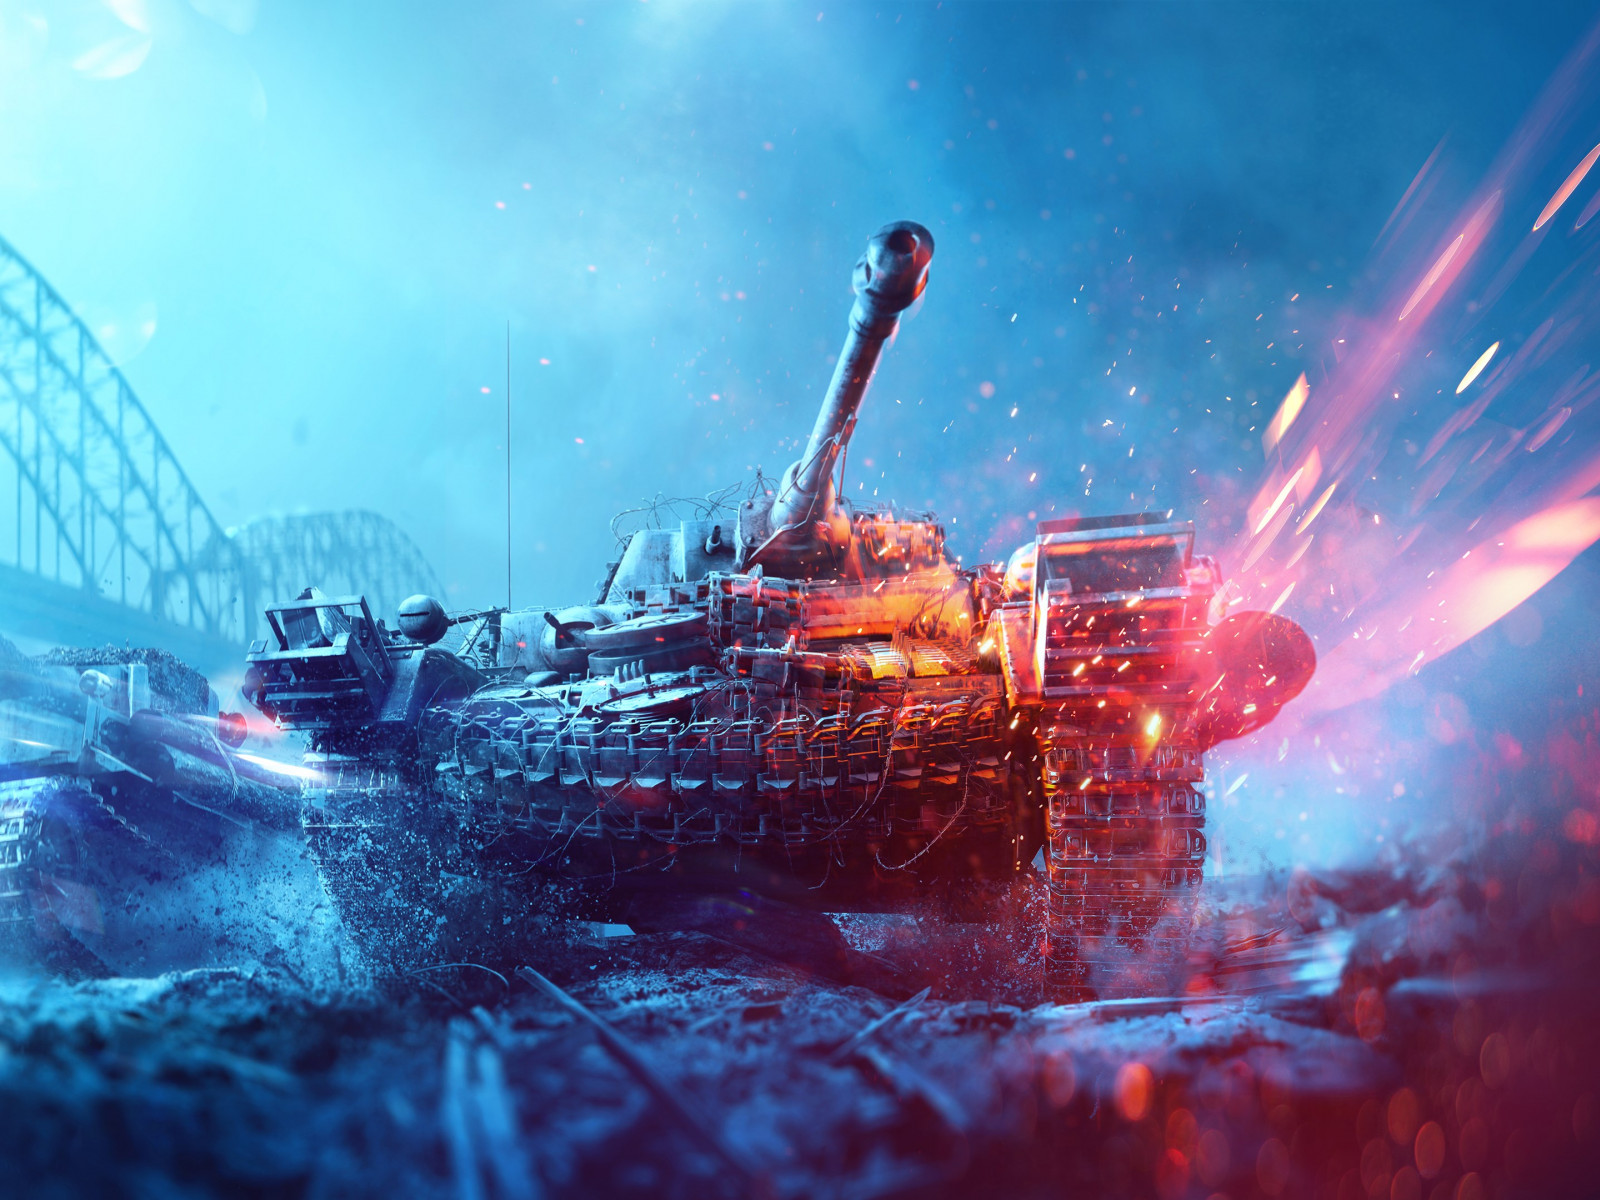 Battlefield 5 poster with tanks wallpaper 1600x1200